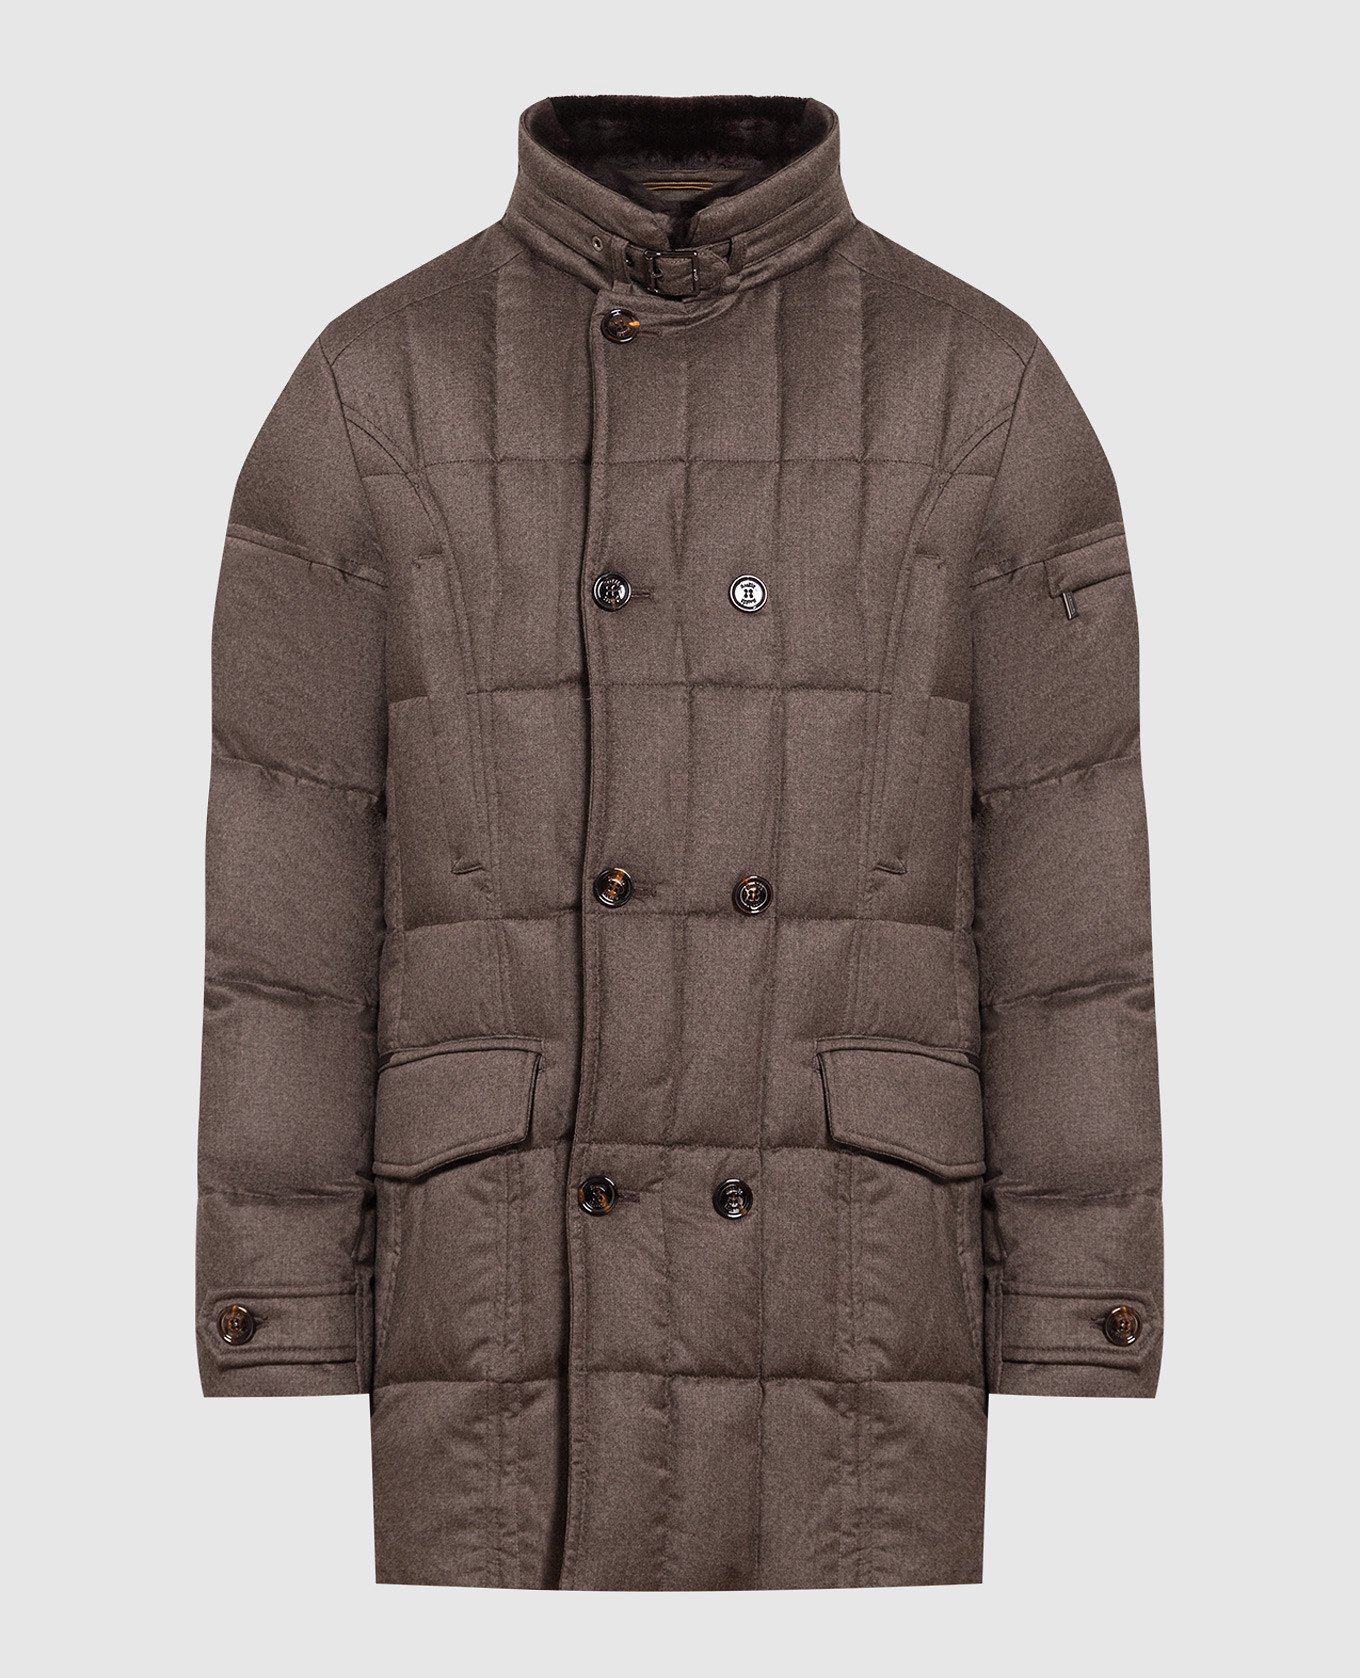 Brown wool and cashmere down jacket